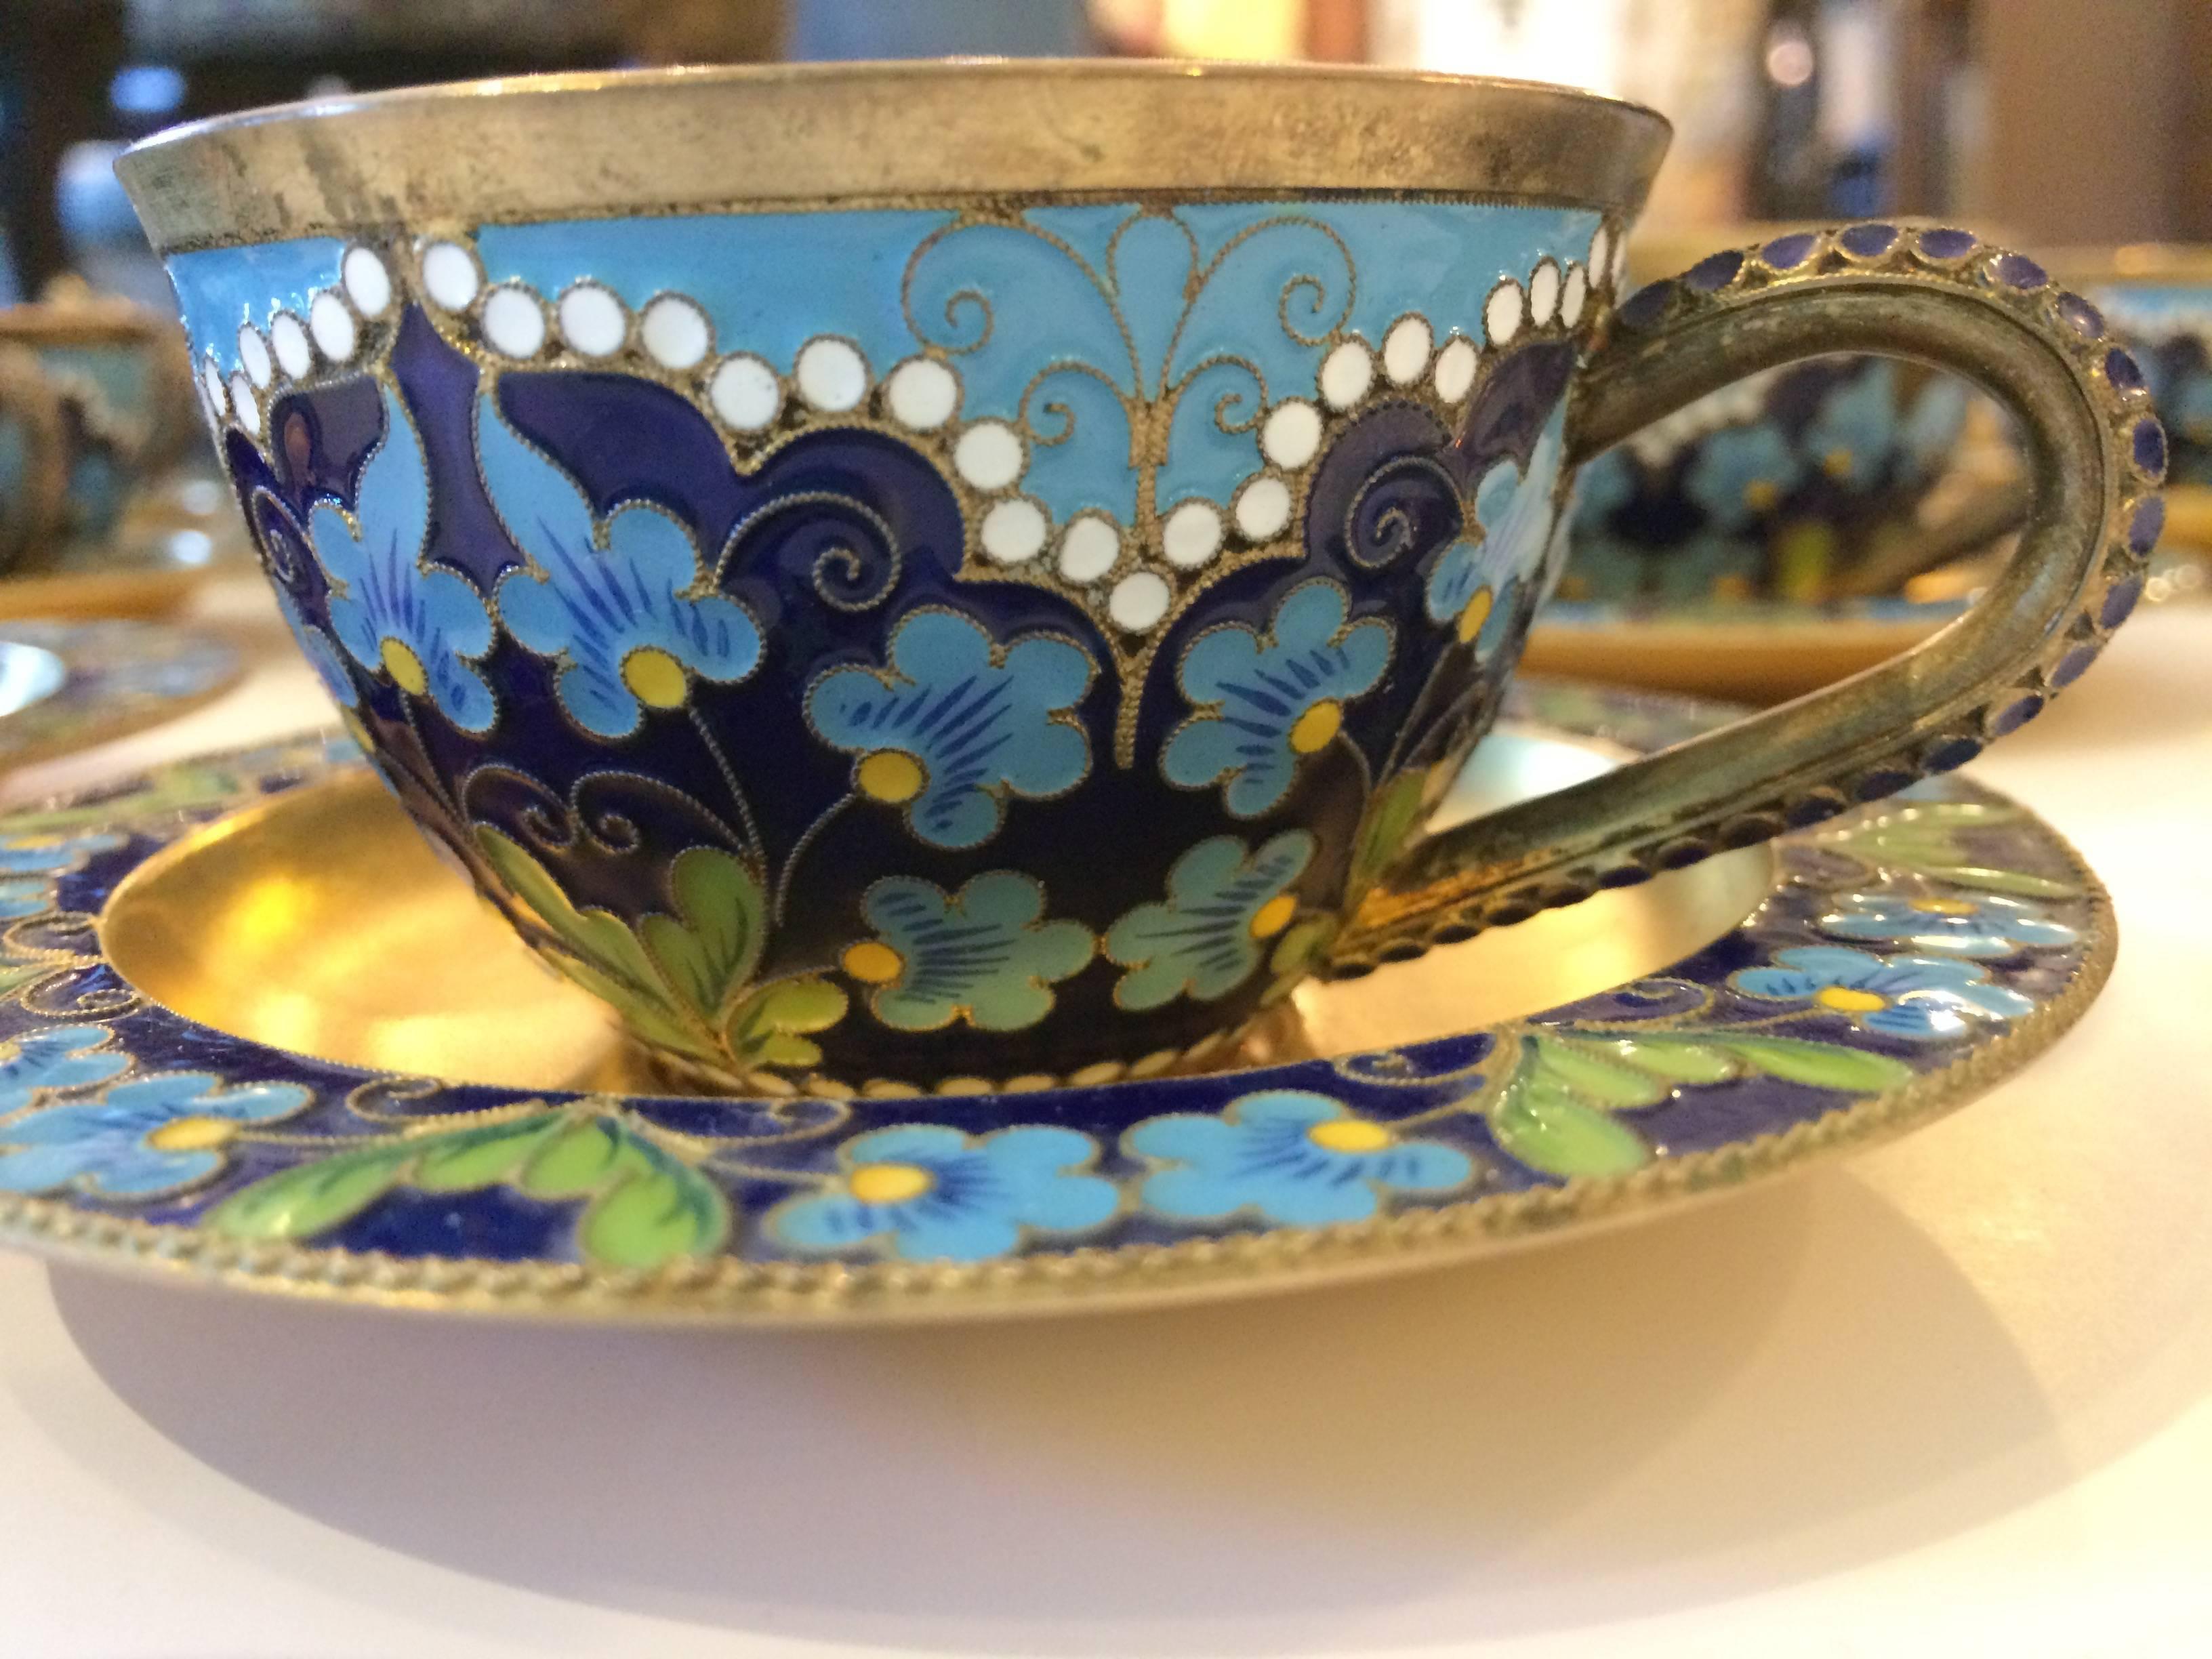 Fifty piece Russian cloisonné enameled sterling silver tea set plated in gold.
12 teacups, 12 saucers, 12 teaspoons, 12 tea strainer holders, a tea strainer and a round sugar bowl with a swing handle.
Each decorated with cobalt, turquoise, green,